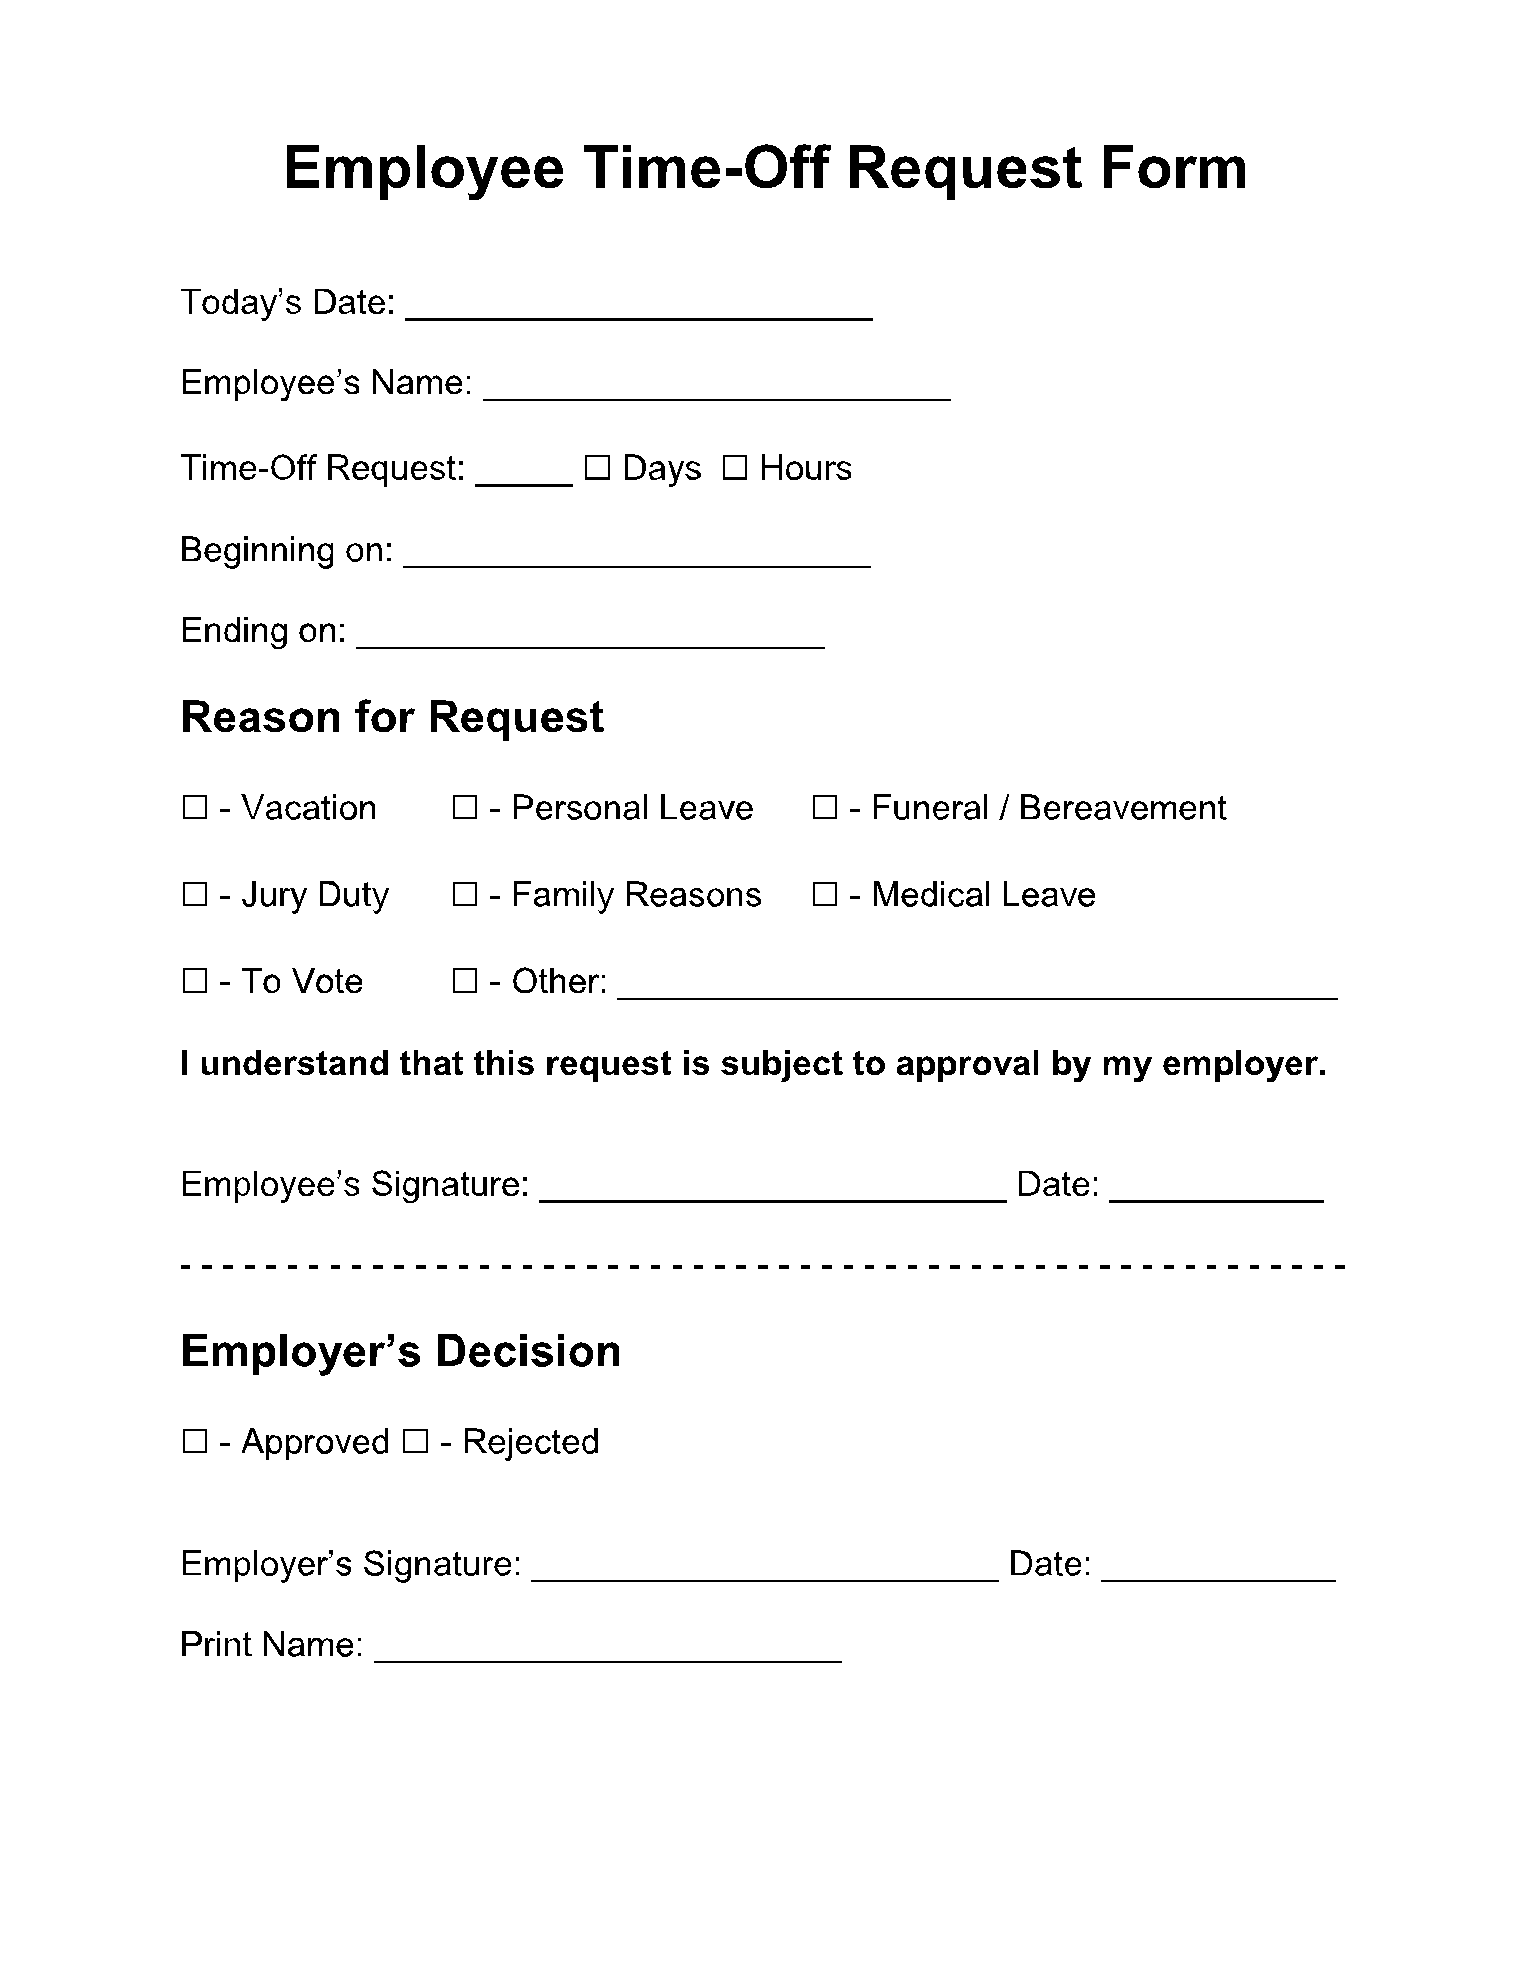 Time off Request Form